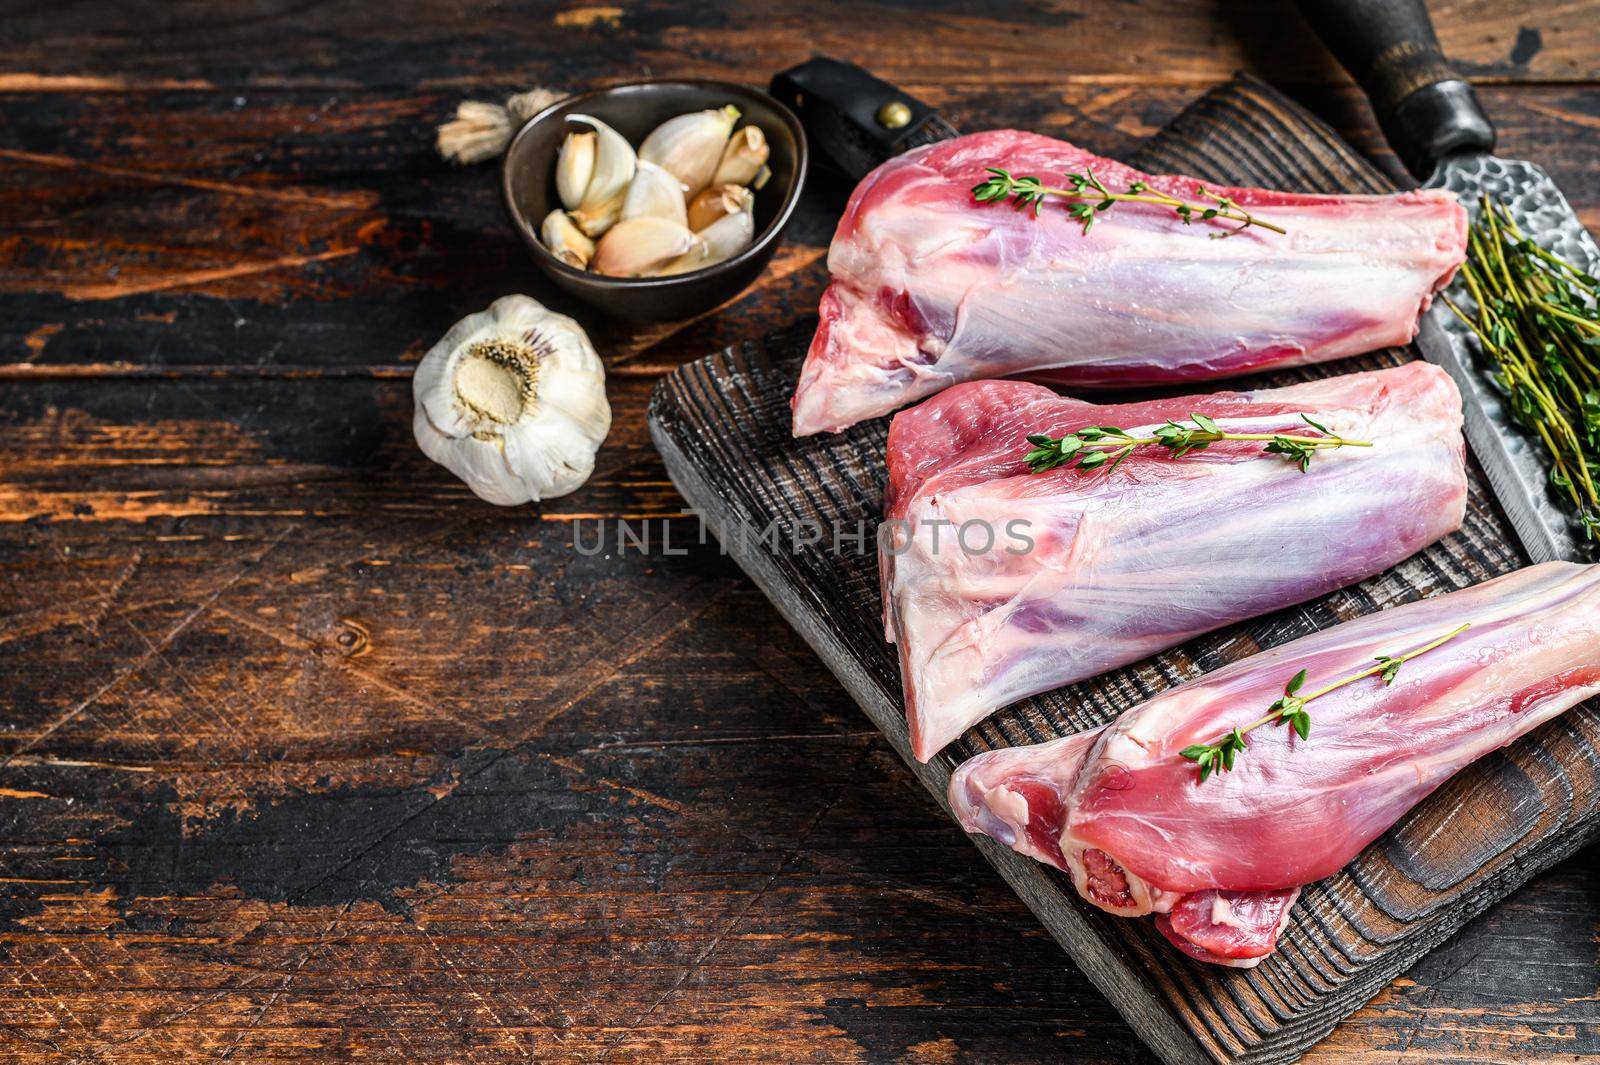 Raw lamb shanks meat on a cutting board with herbs. Dark wooden background. Top view. Copy space.